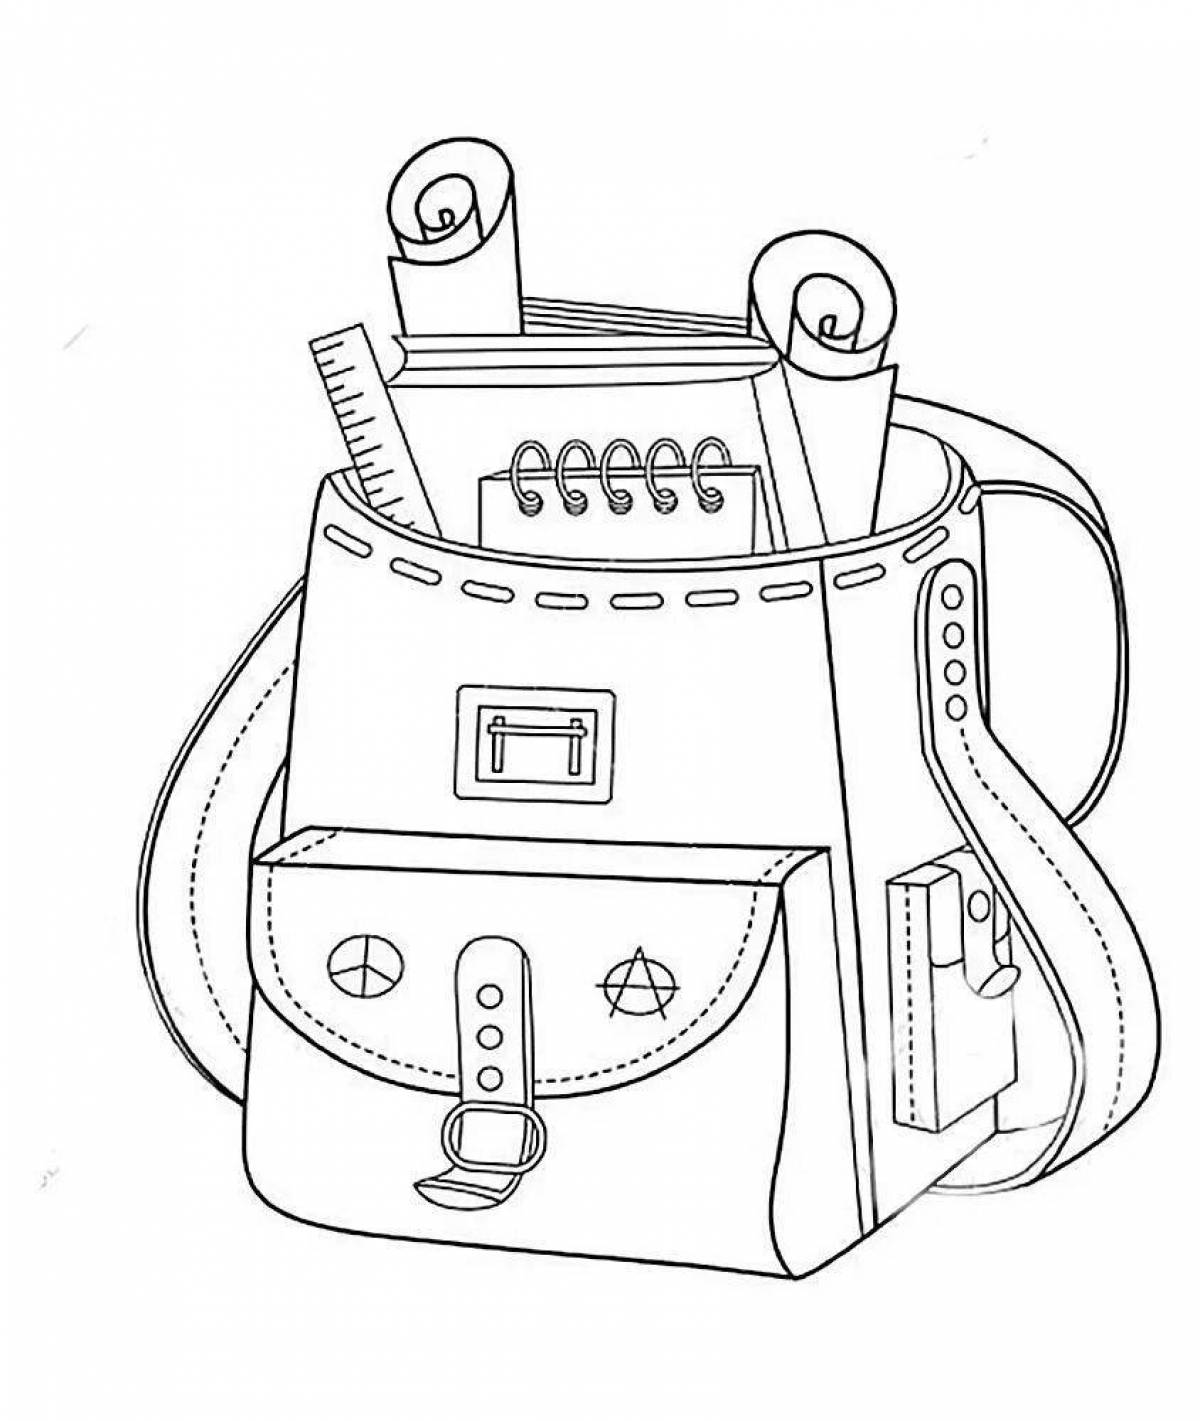 Impressive backpack coloring page